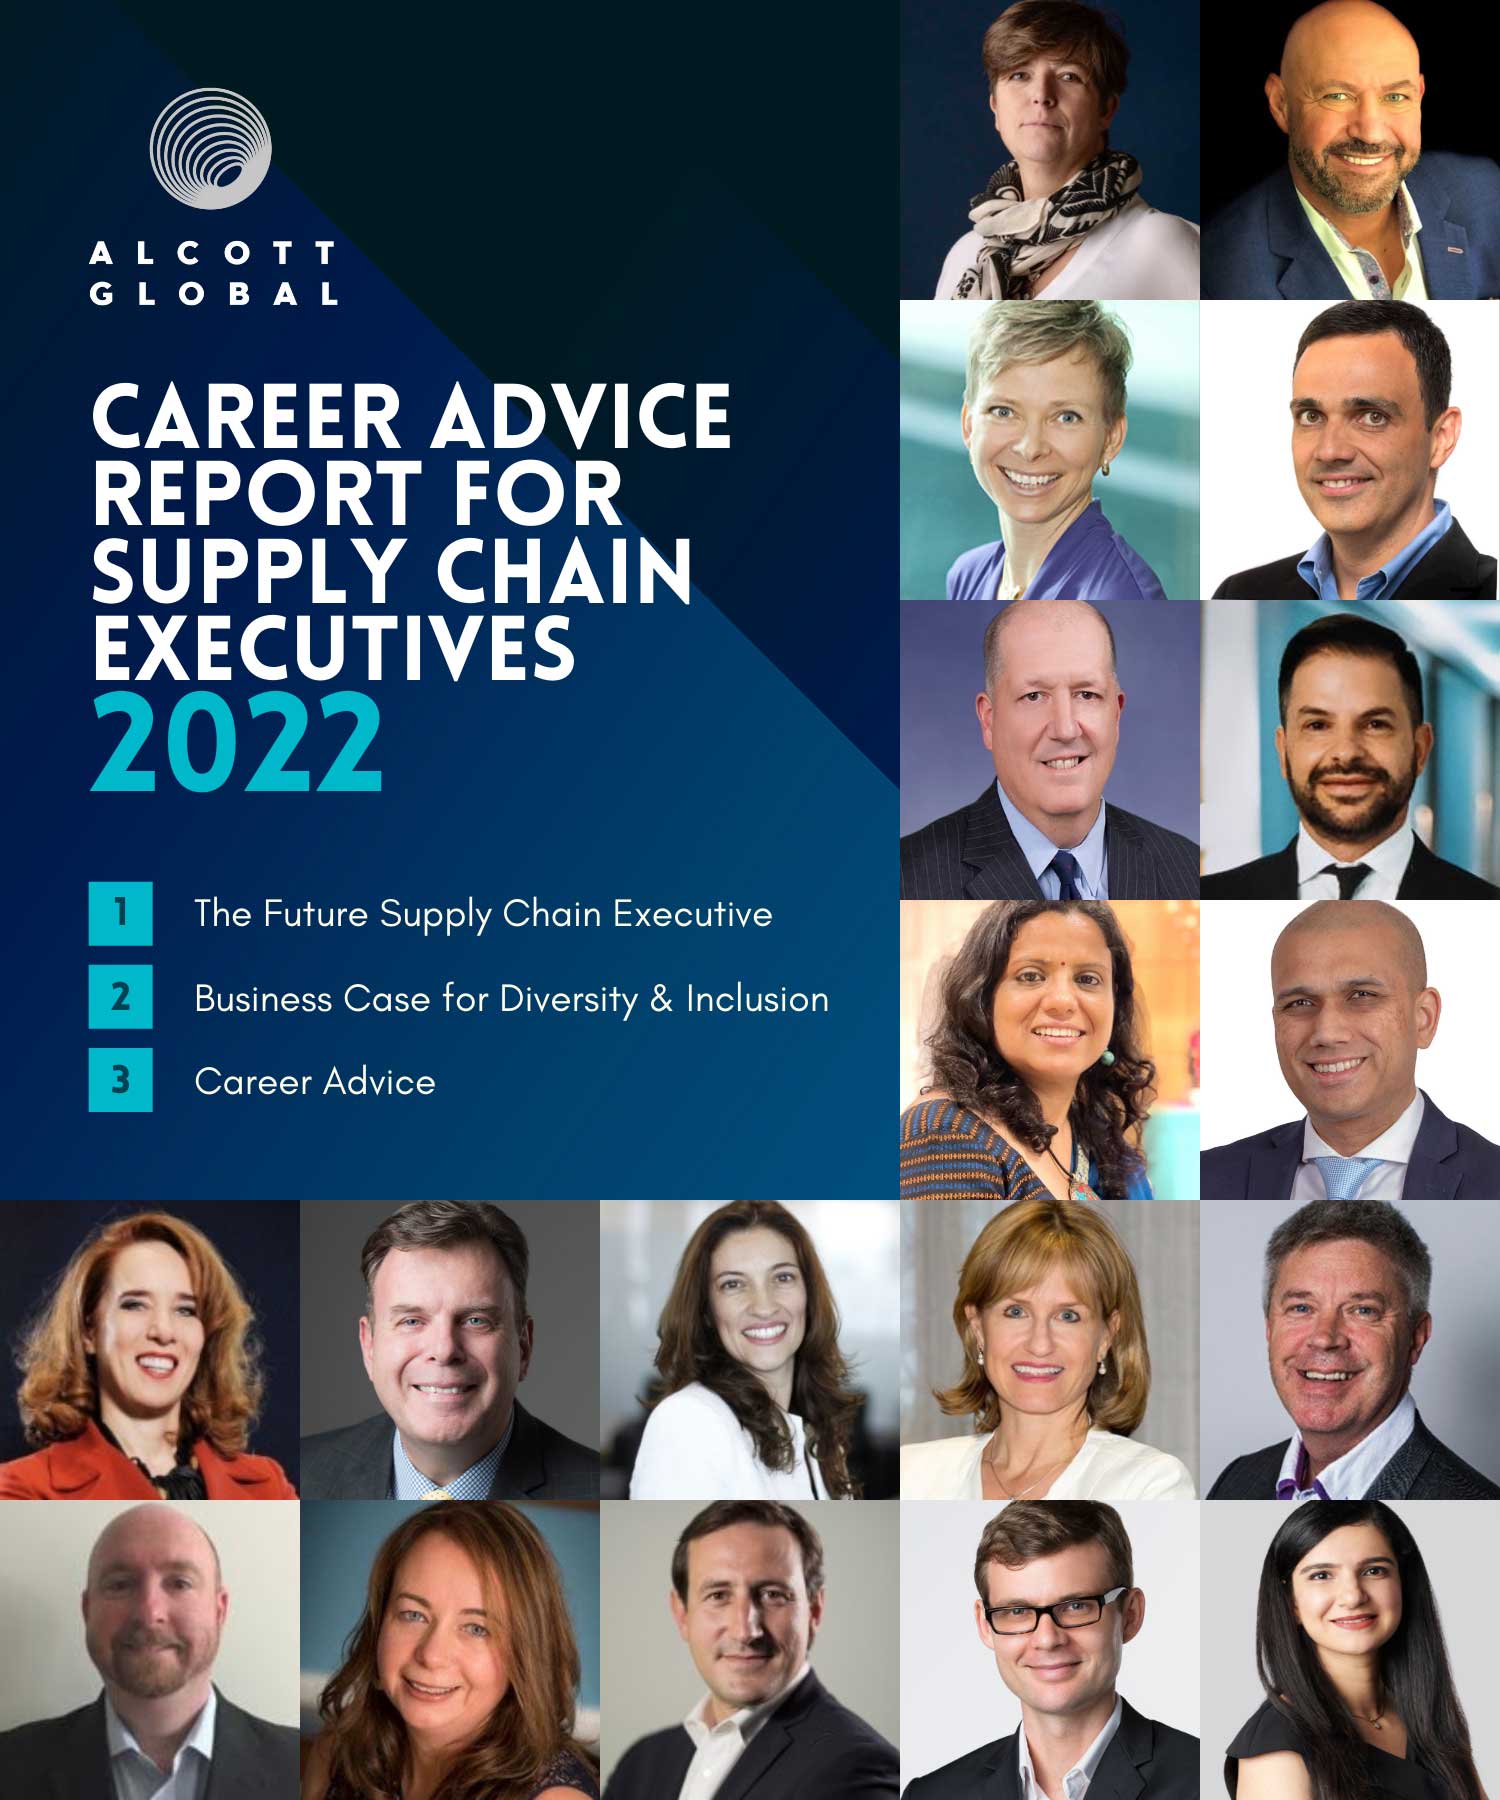 Career-Advice-Report-for-Supply-Chain-Executives-2022-Featured-Image-Mobile